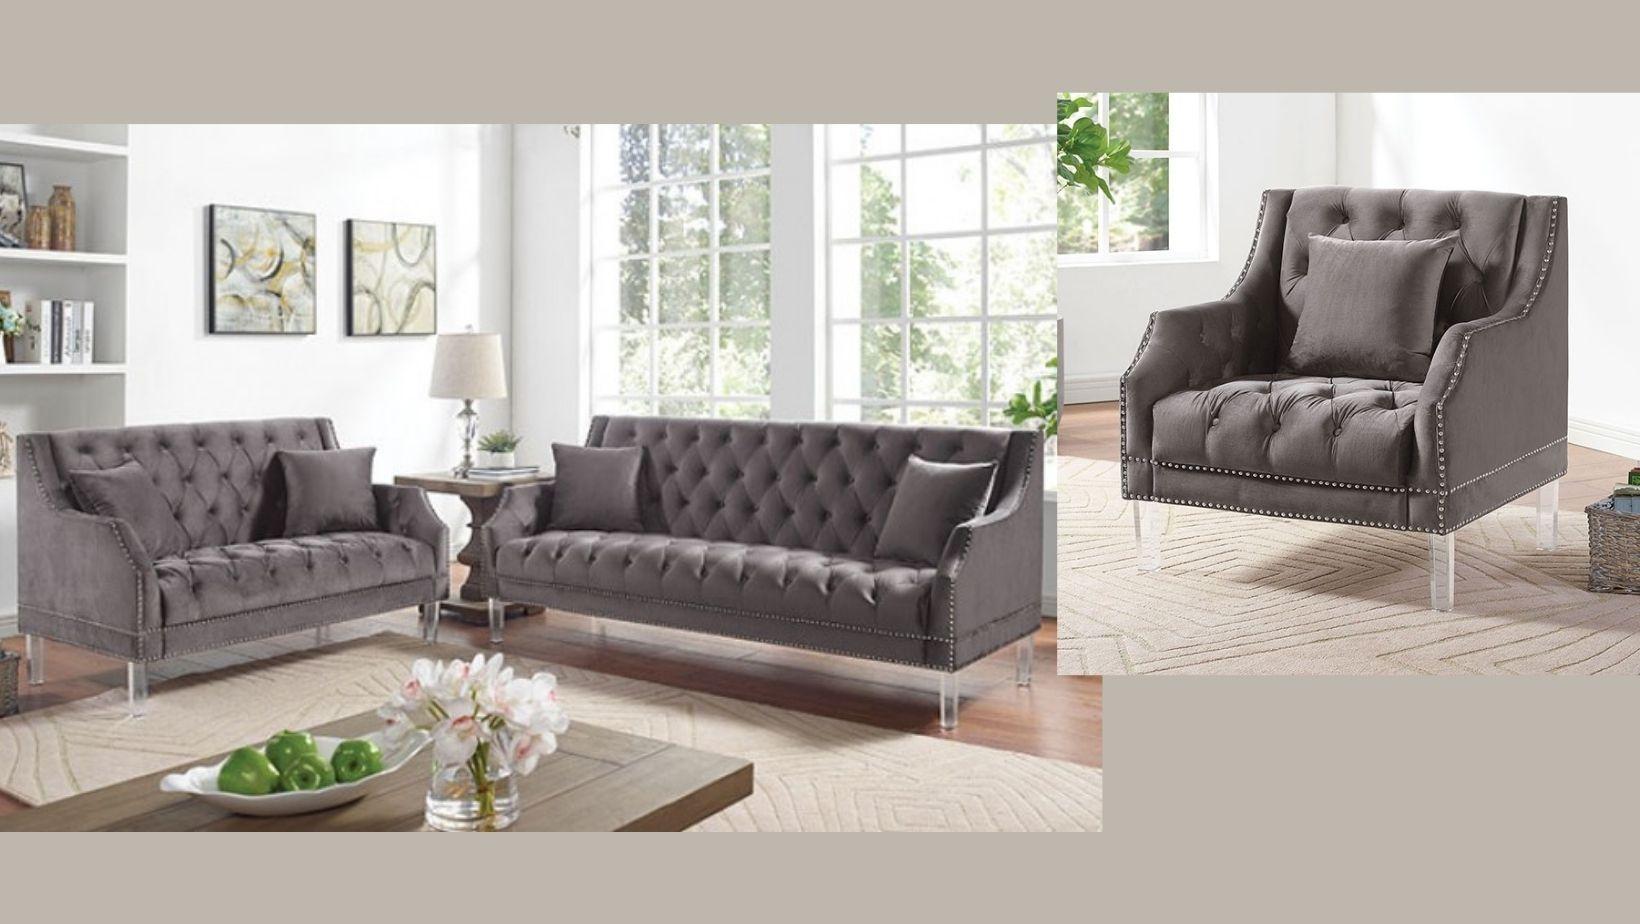 Transitional Sofa Loveseat and Chair Set CM6065GY-SF-3PC Franceschi CM6065GY-SF-3PC in Gray 